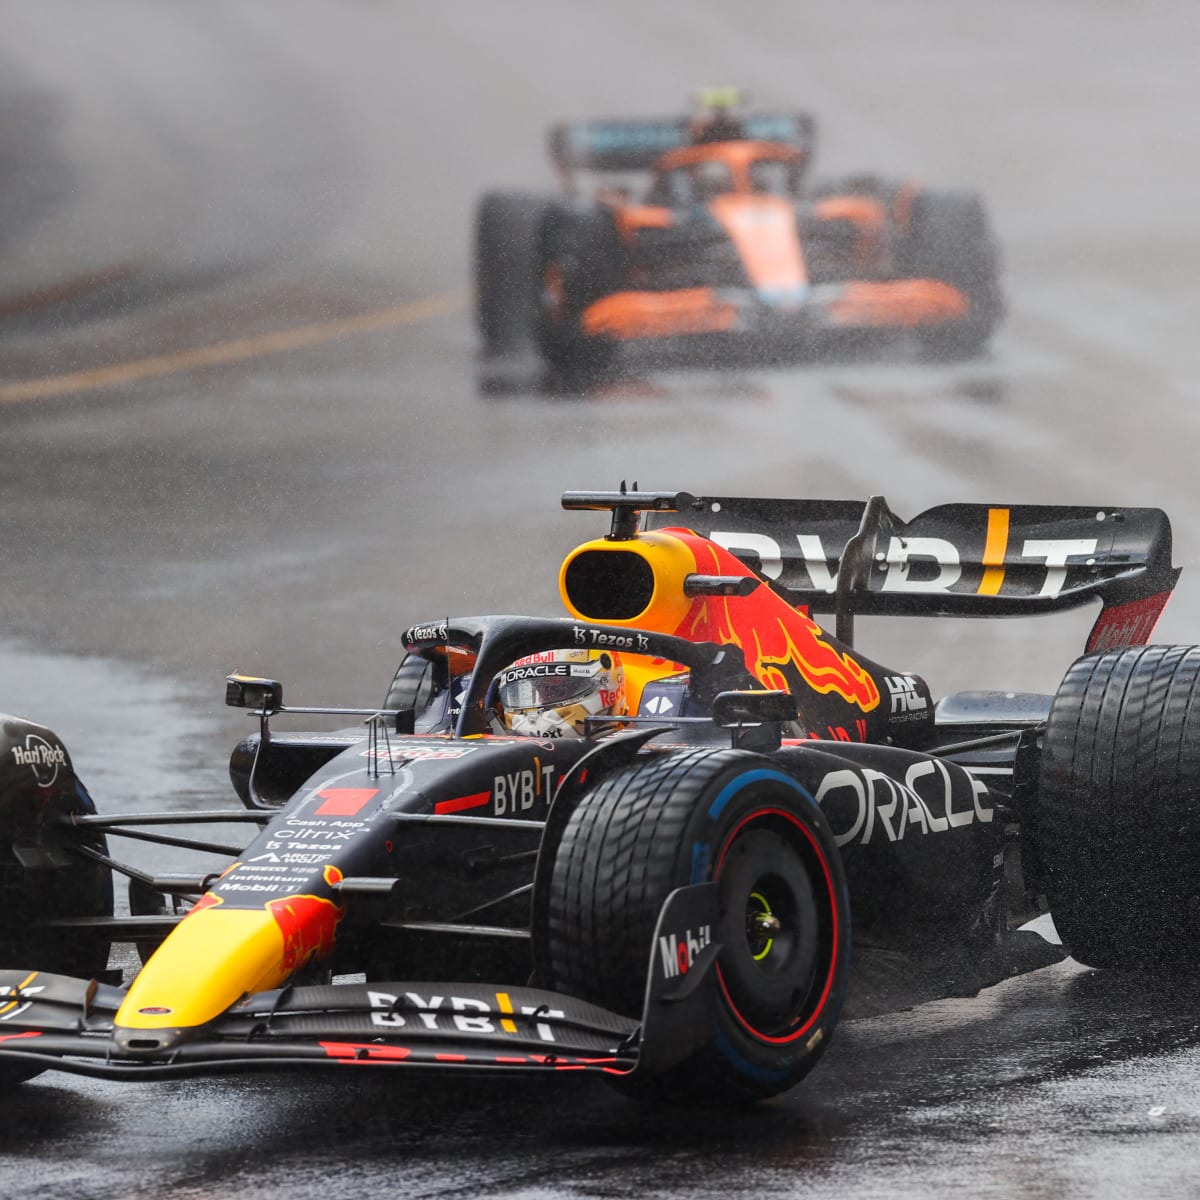 camouflage Verwacht het kussen F1 News: Max Verstappen - "F1 cars are not designed to drive on a street  track" - F1 Briefings: Formula 1 News, Rumors, Standings and More